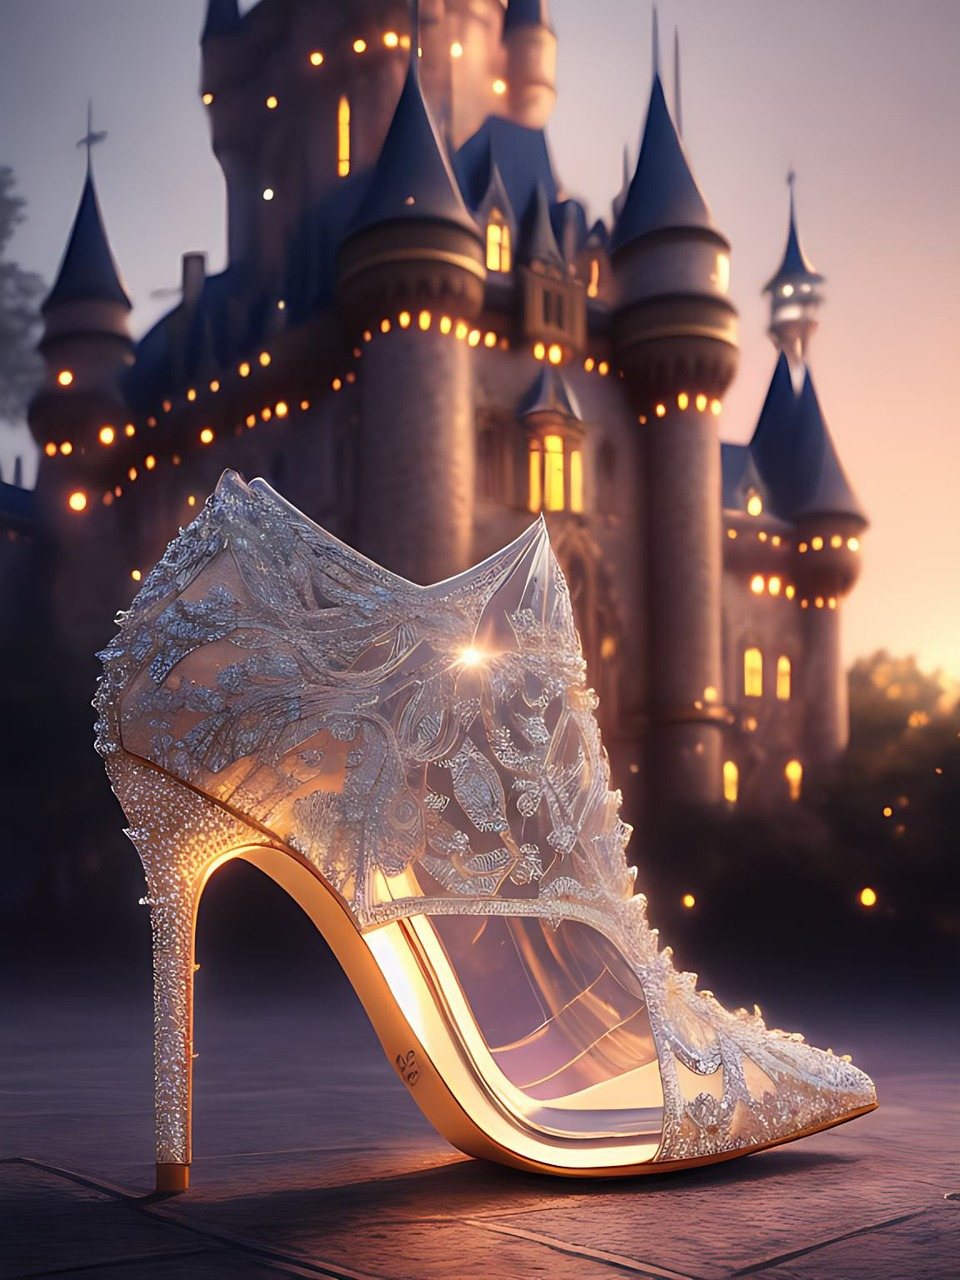 Cinderella Shoes Captions And Quotes